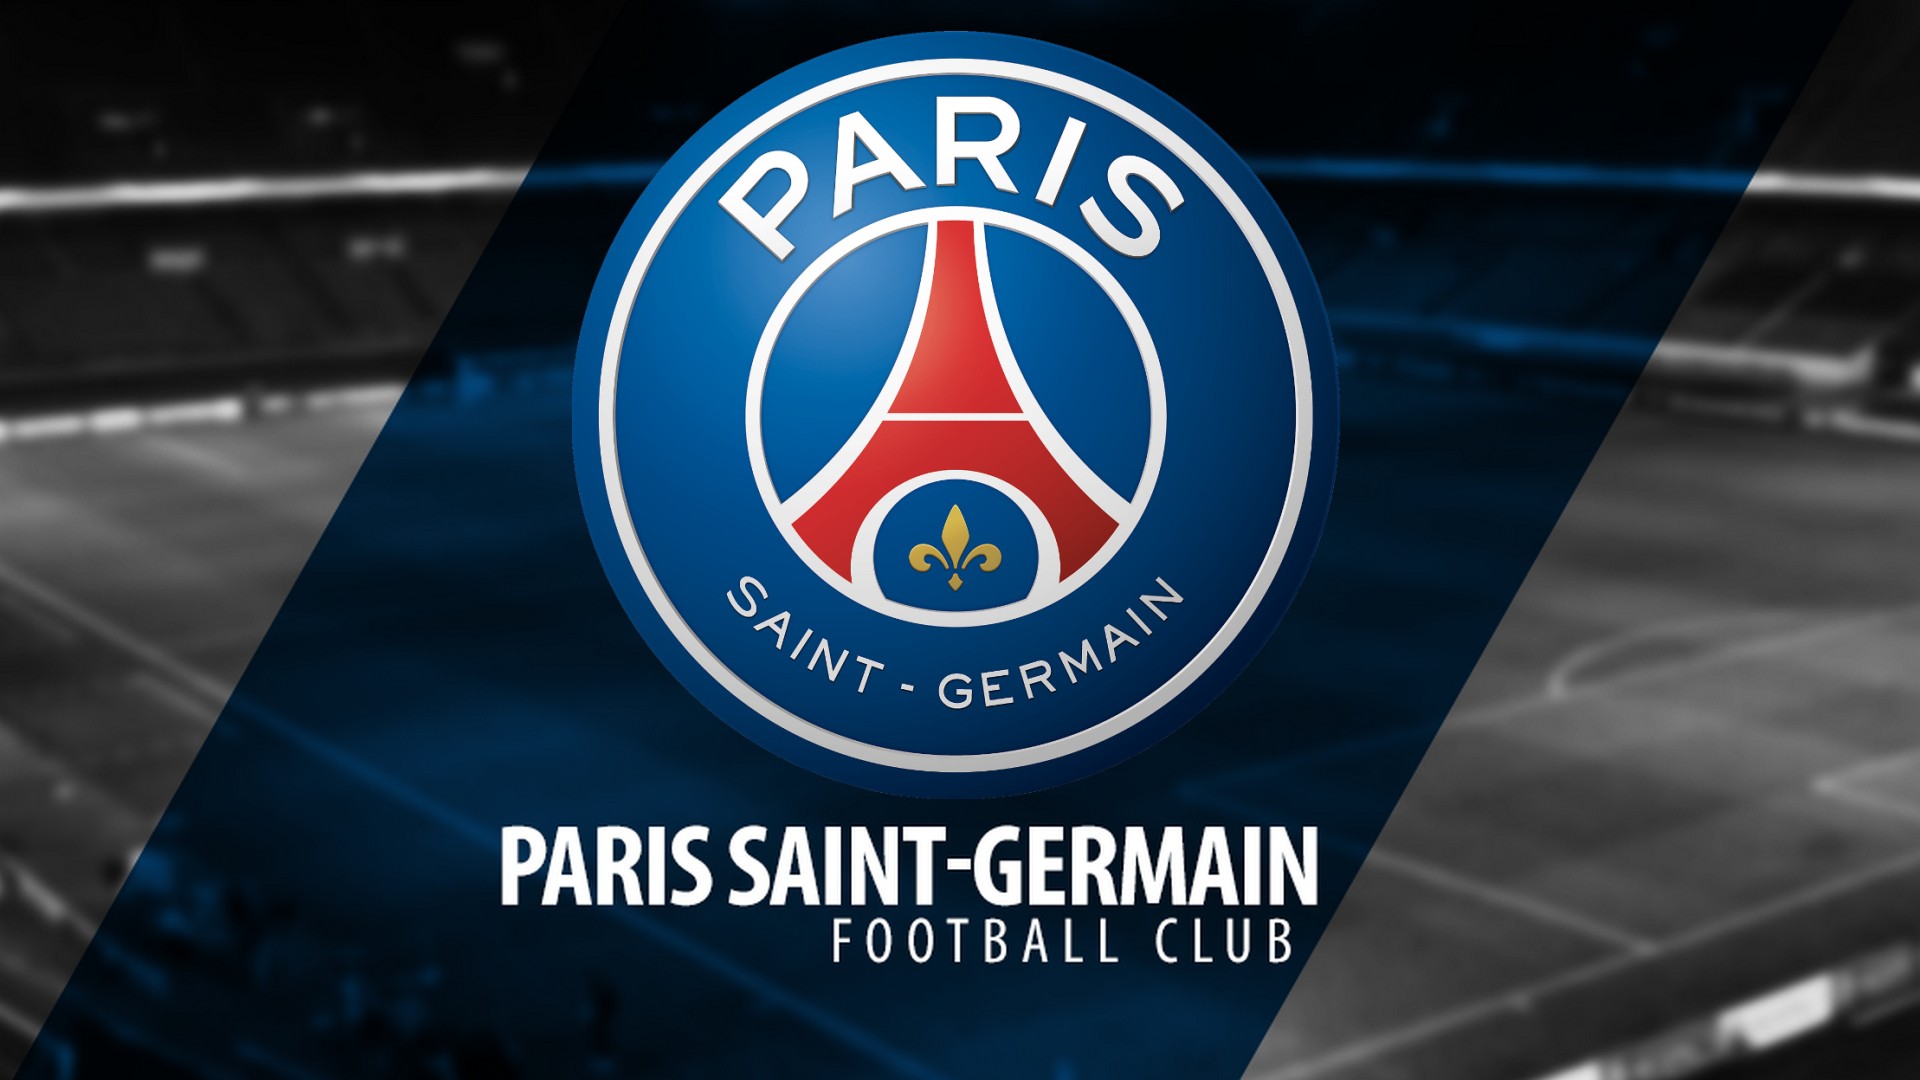 Paris Saint-Germain Wallpaper HD With Resolution 1920X1080 pixel. You can make this wallpaper for your Mac or Windows Desktop Background, iPhone, Android or Tablet and another Smartphone device for free